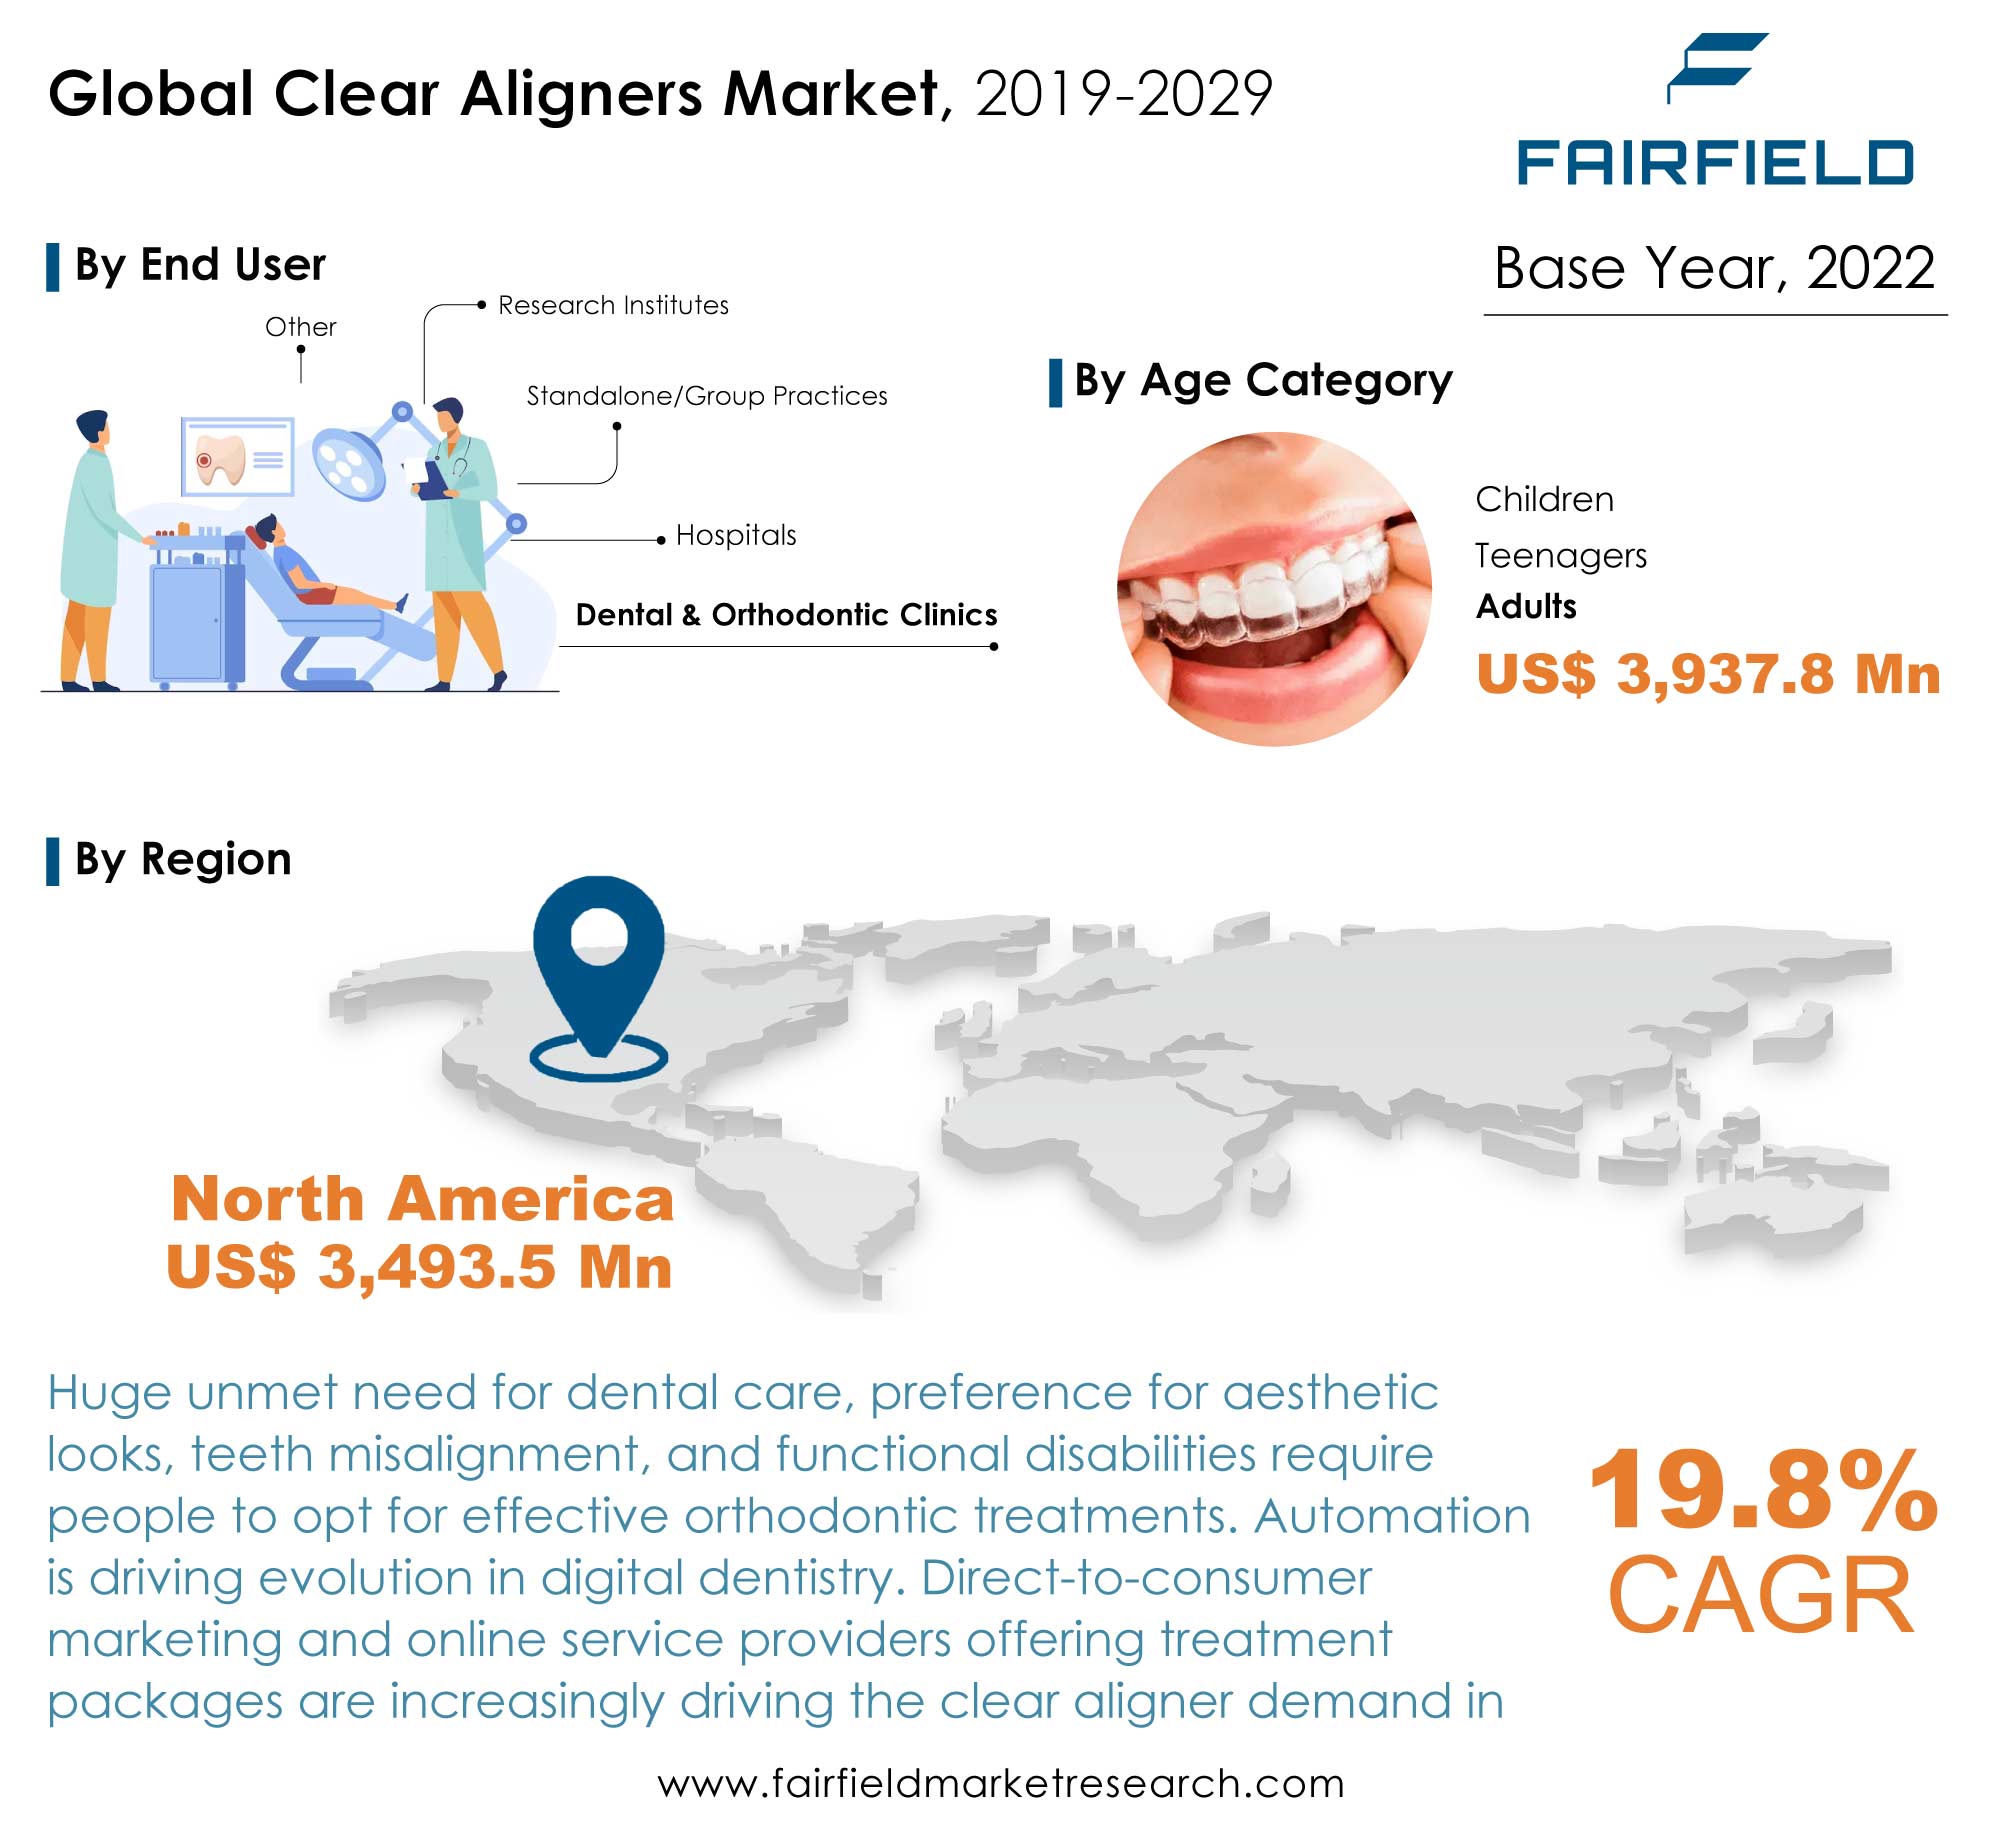 Global Clear Aligners Market, 2019-2029 =~

FRIRFIELD
| By End User a Base Year, 2022
Other 7 * Research Institutes
o'" Standalone/Group Practices 1 By Age Category
1 x |
1D) ) Children
‘o « Hospitals Teenagers
nl = Sn Dental & Orthodontic Clinics Adults
US$ 3,937.8 Mn

 

| By Region

North America
US$ 3,493.5 Mn

 

Huge unmet need for dental care, preference for aesthetic

looks, teeth misalignment, and functional disabilities require 1 9 8%
people to opt for effective orthodontic treatments. Automation o
is driving evolution in digital dentistry. Direct-to-consumer CAG R

marketing and online service providers offering treatment
packages are increasingly driving the clear aligner demand in

www fairfieldmarketresearch.com